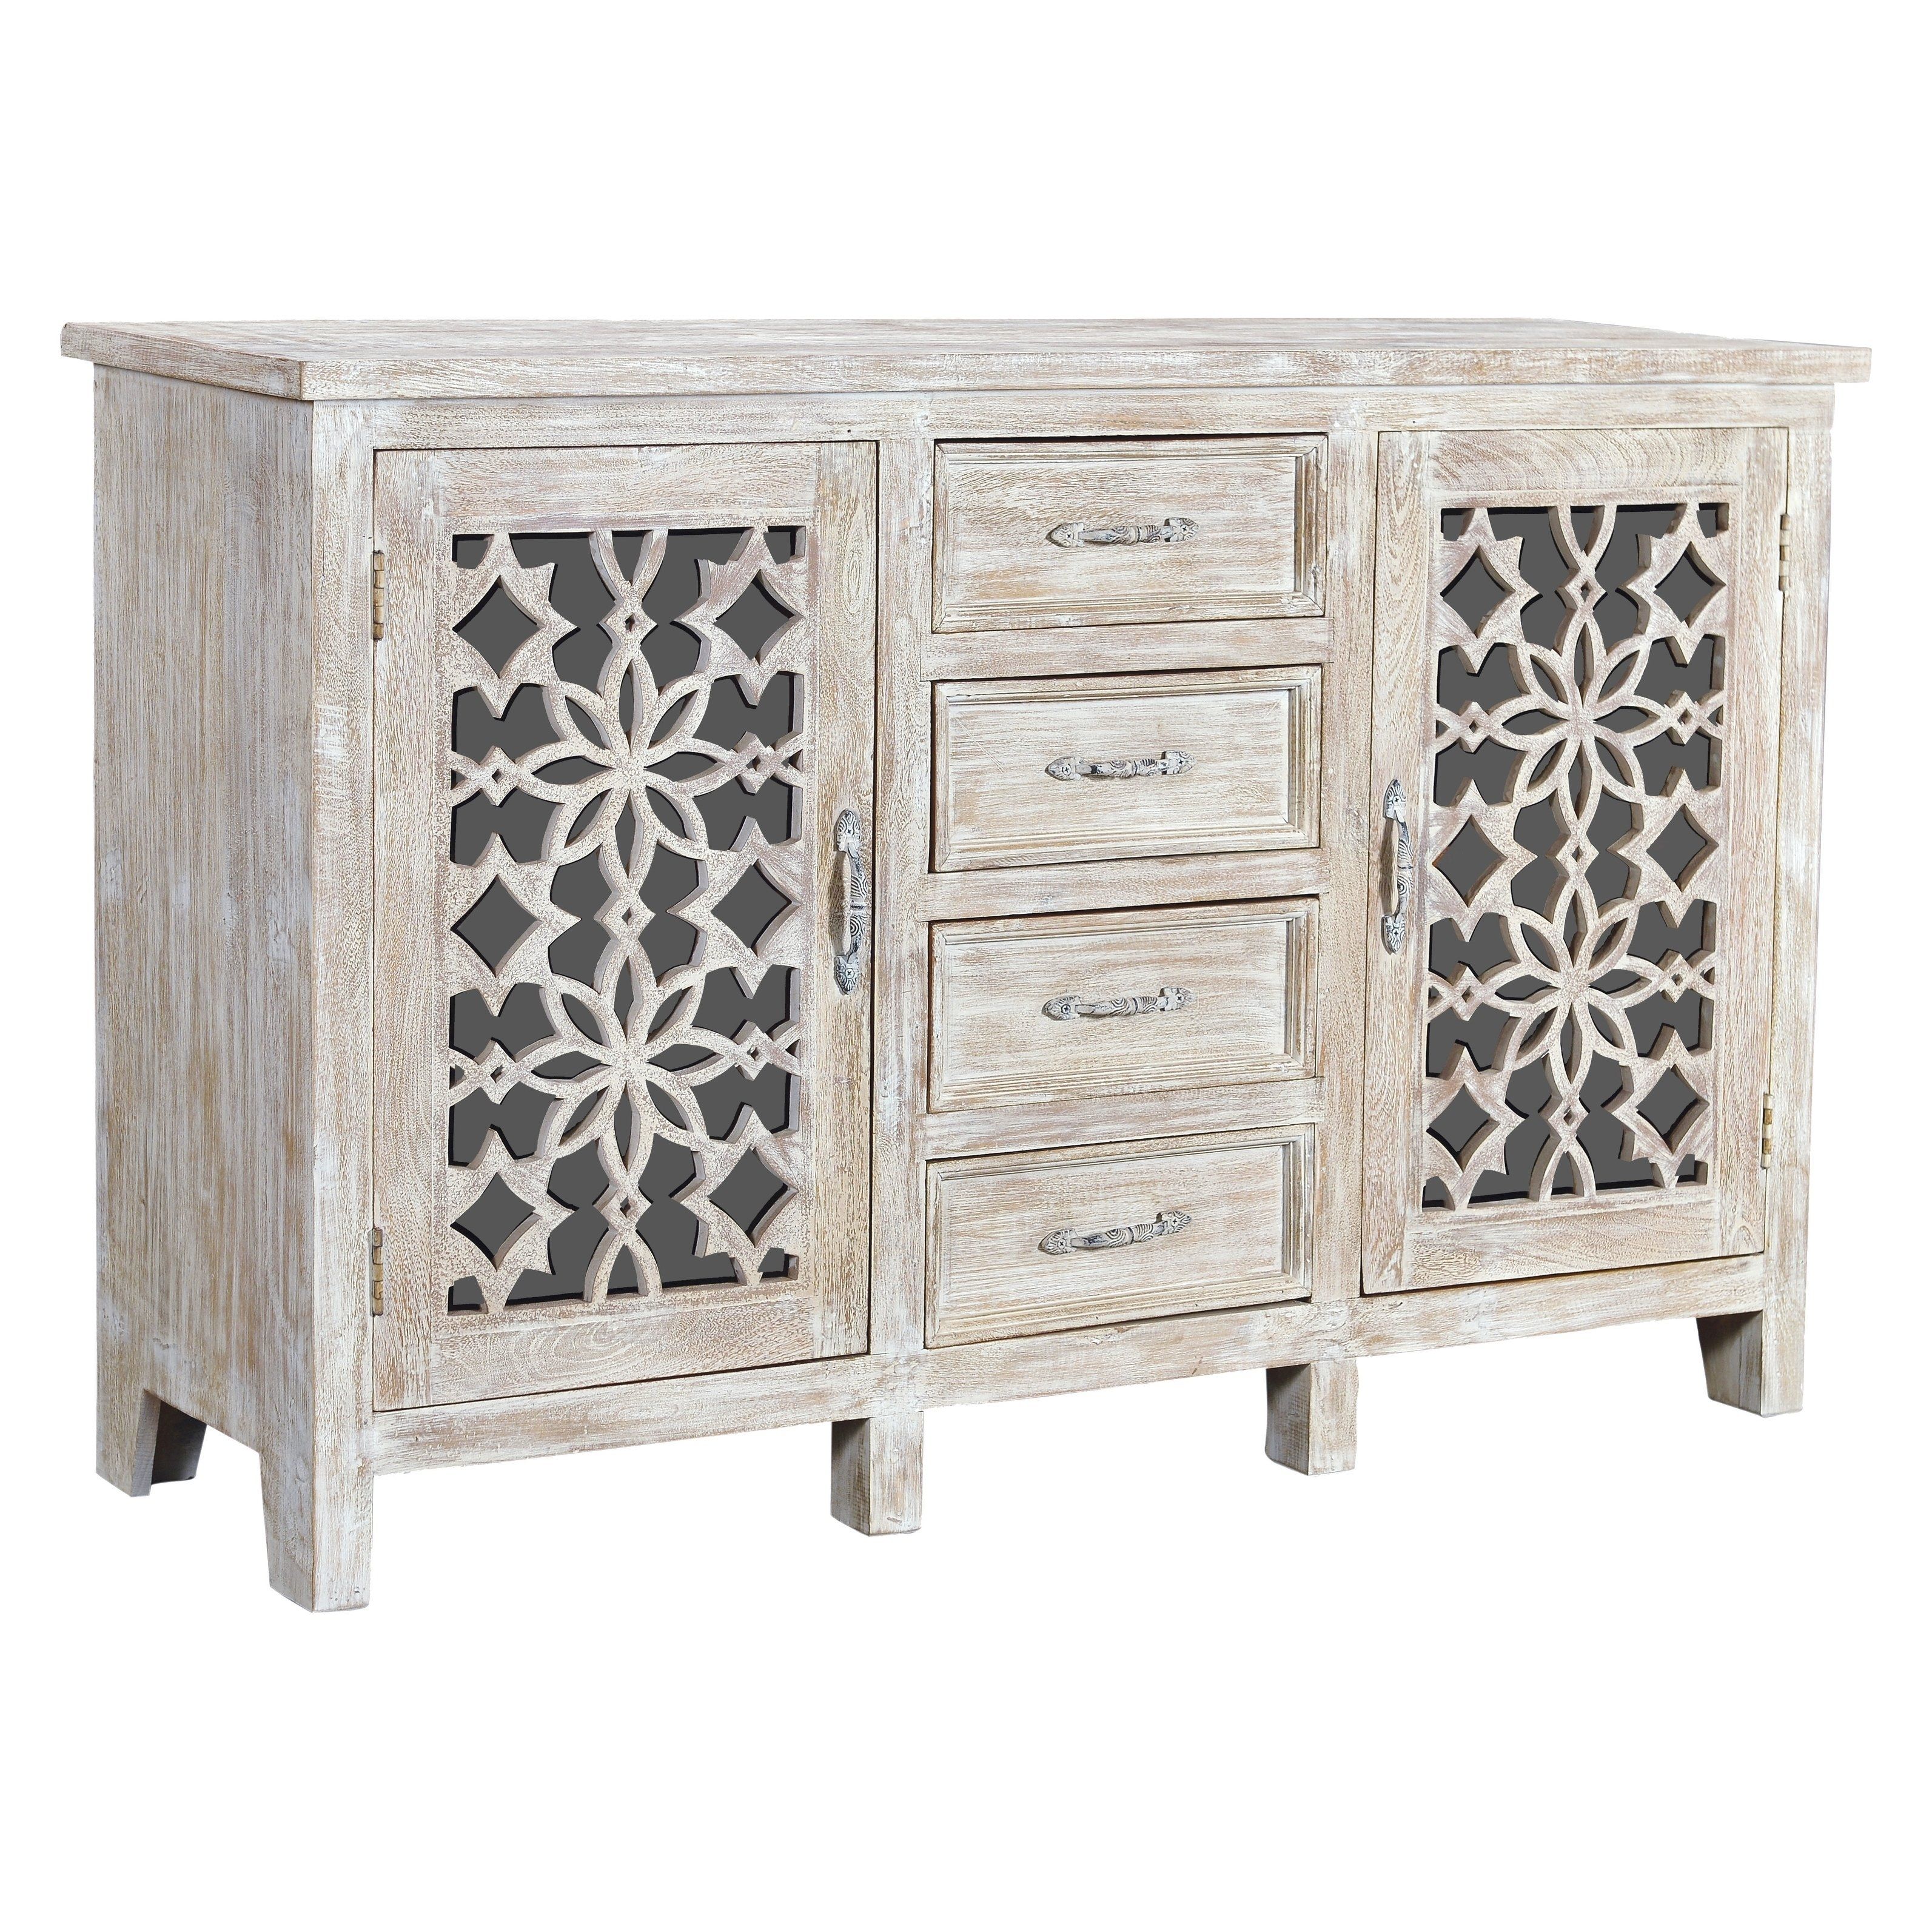 Shop Evan 4 Drawer 2 Door Carved Sideboard – Free Shipping Today Inside Antique White Distressed 3 Drawer/2 Door Sideboards (View 14 of 30)